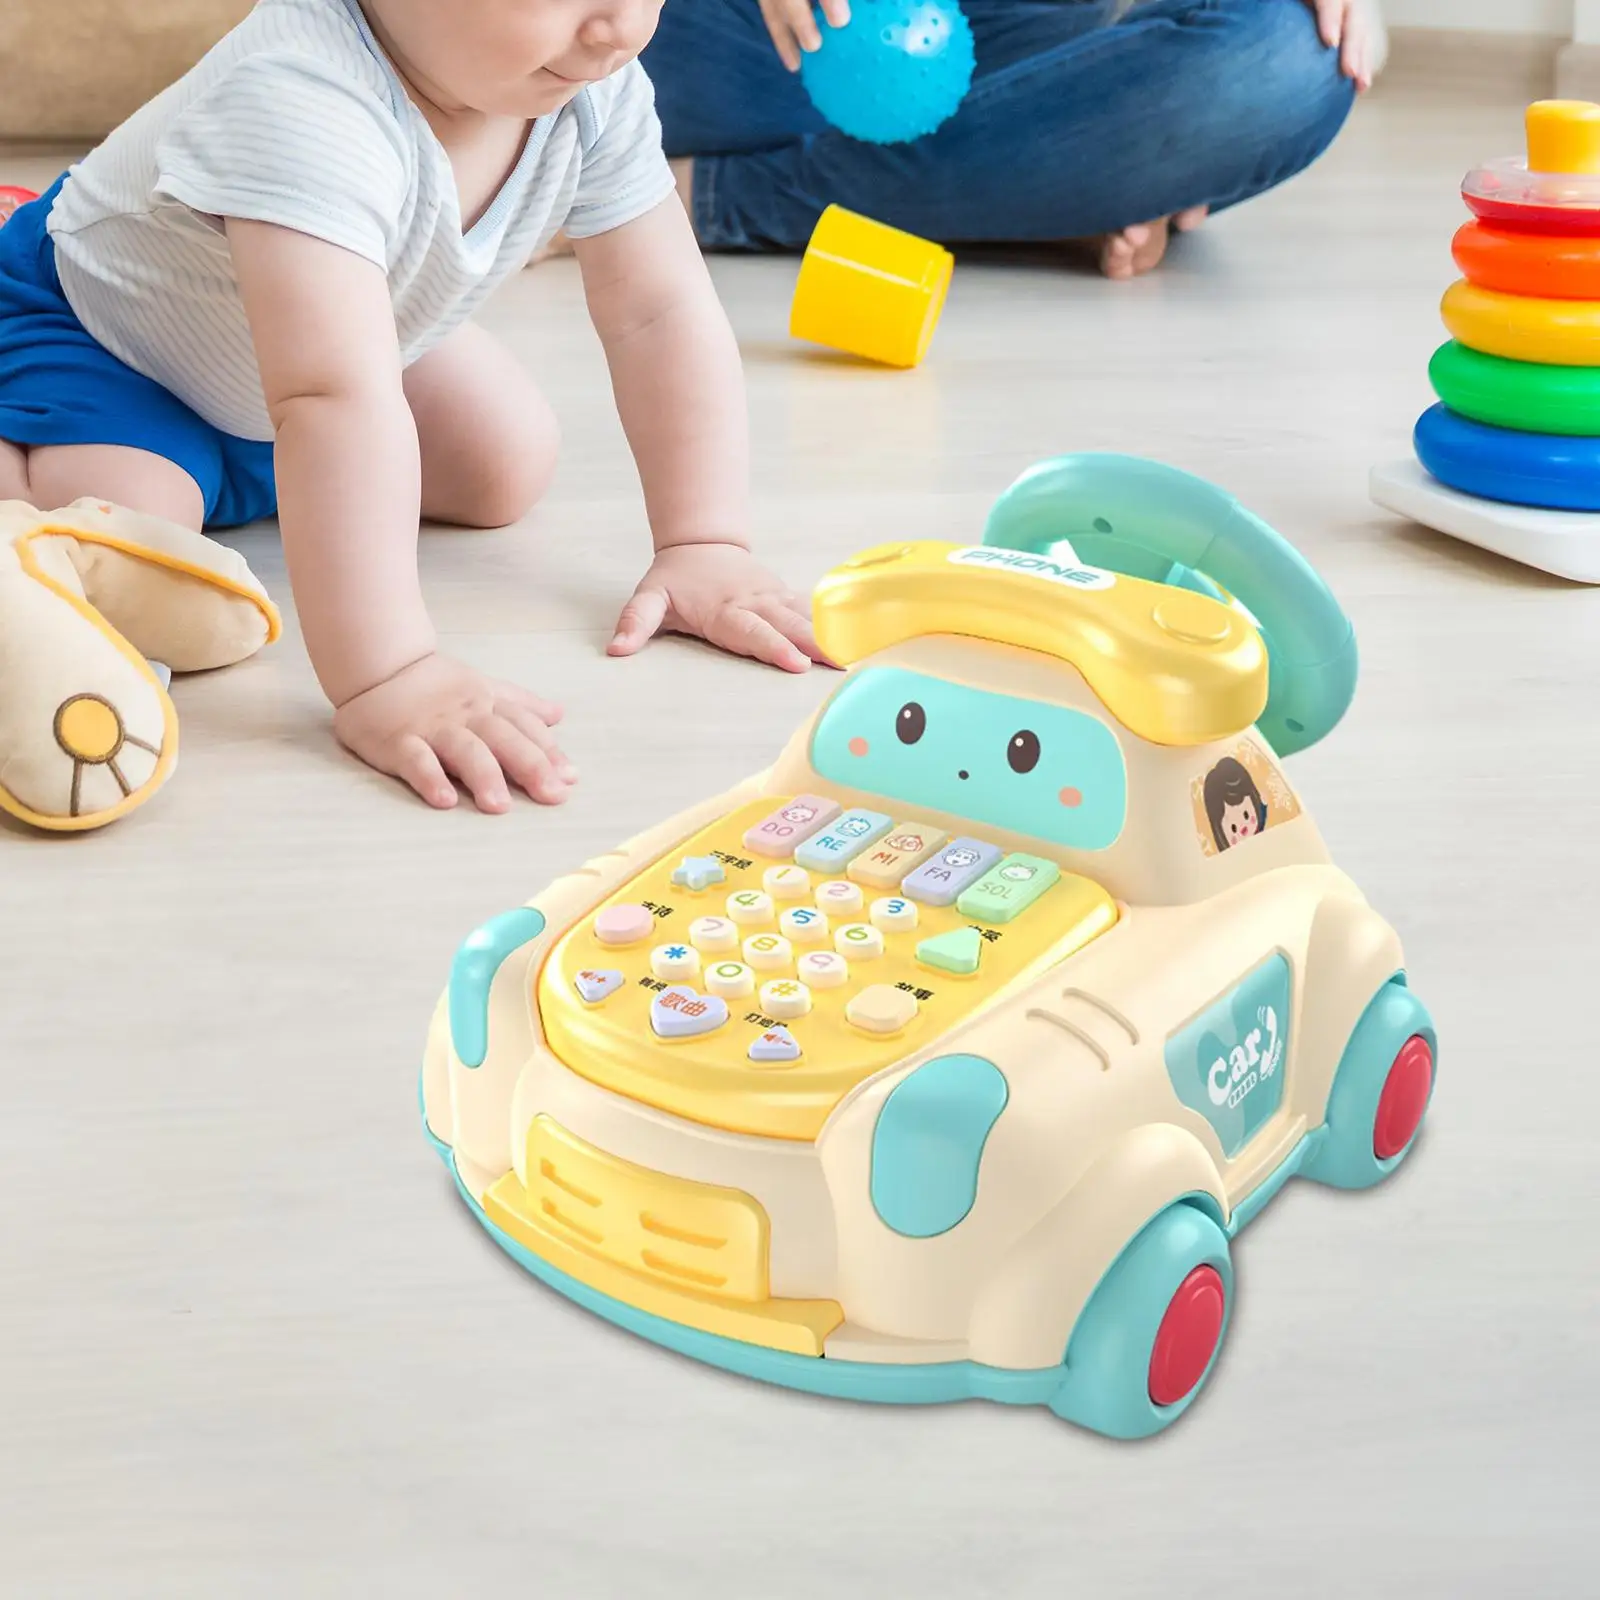 Baby Telephone Toy Movable Fine Motor Skills Educational Children Phone Toy for Game Interaction Activity Education Development